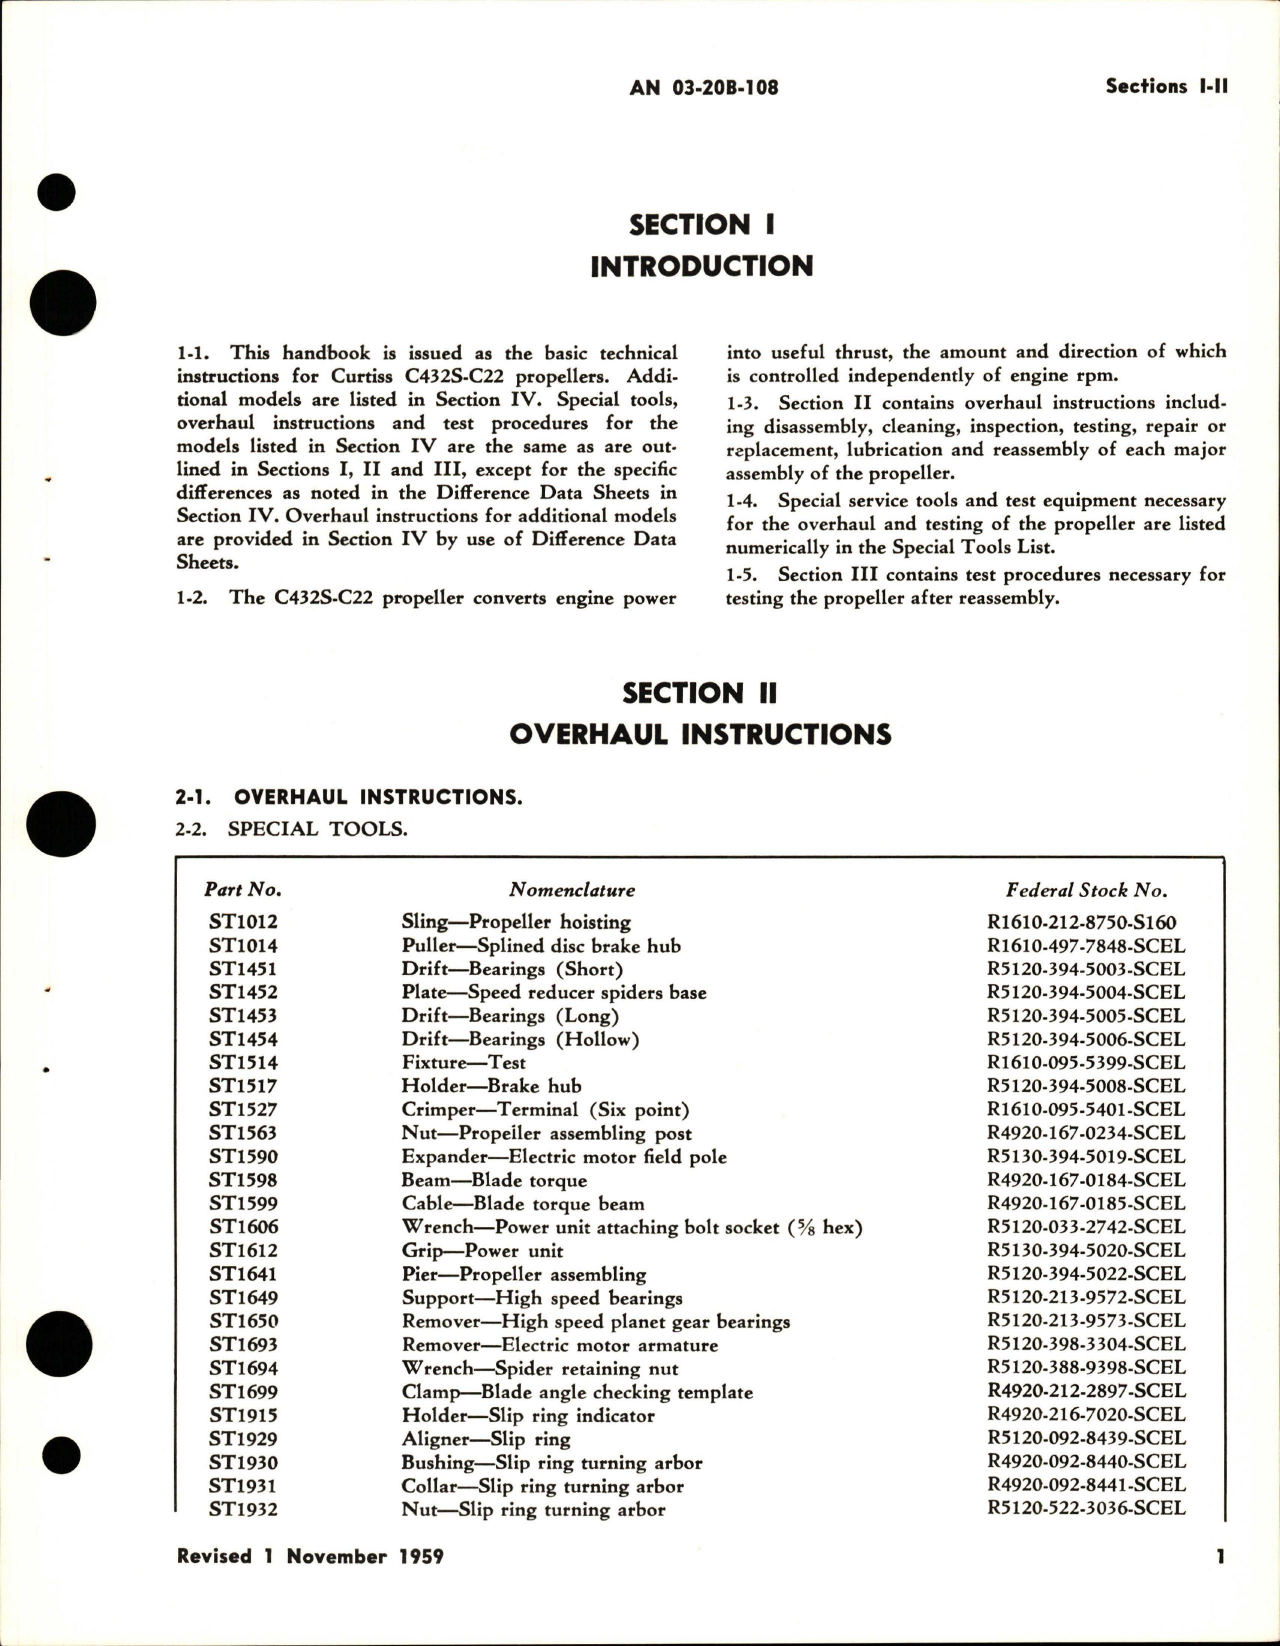 Sample page 7 from AirCorps Library document: Overhaul Instructions for Pitch Lever Type Electric Propeller - Models C432S-C22, C432S-C24, and C432S-C26